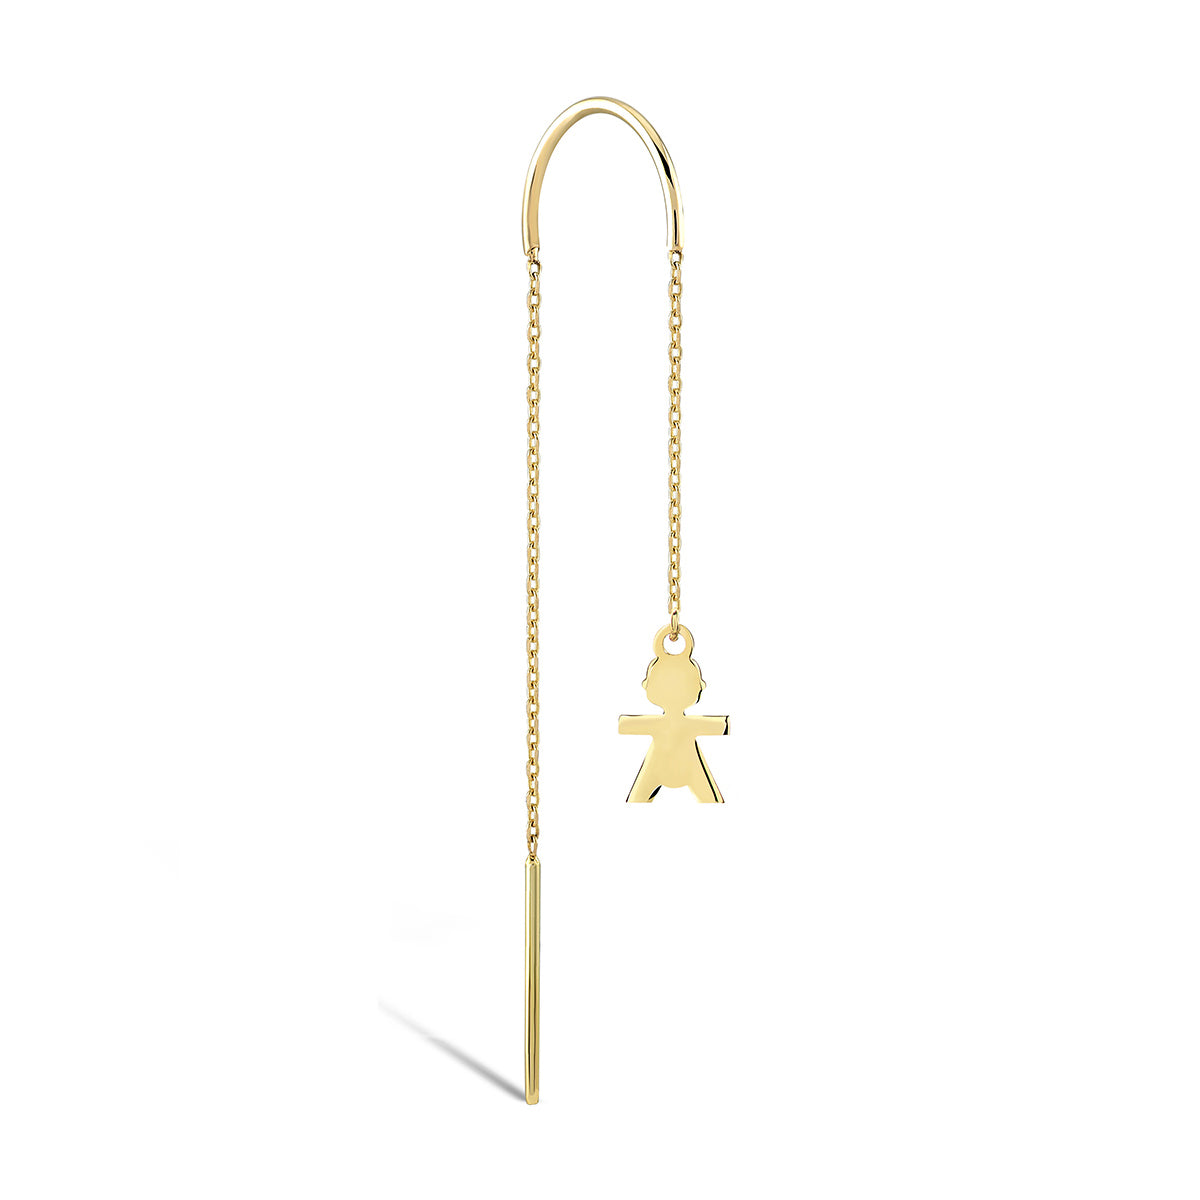 Girl Silhouette Charm Drop Earring in 14K Solid Gold